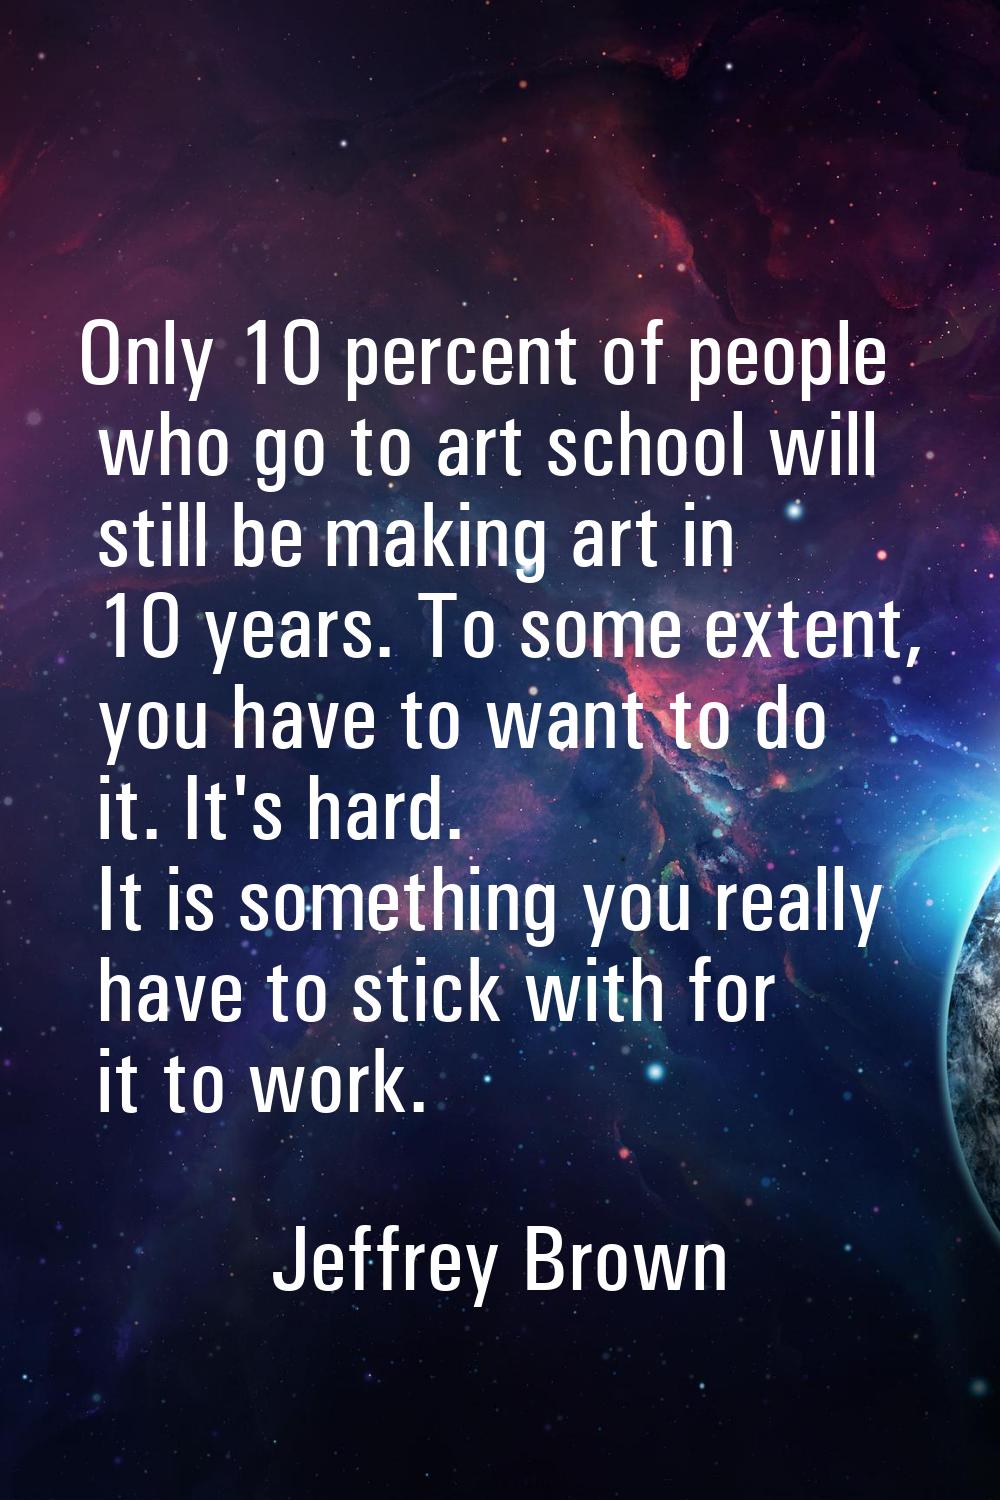 Only 10 percent of people who go to art school will still be making art in 10 years. To some extent